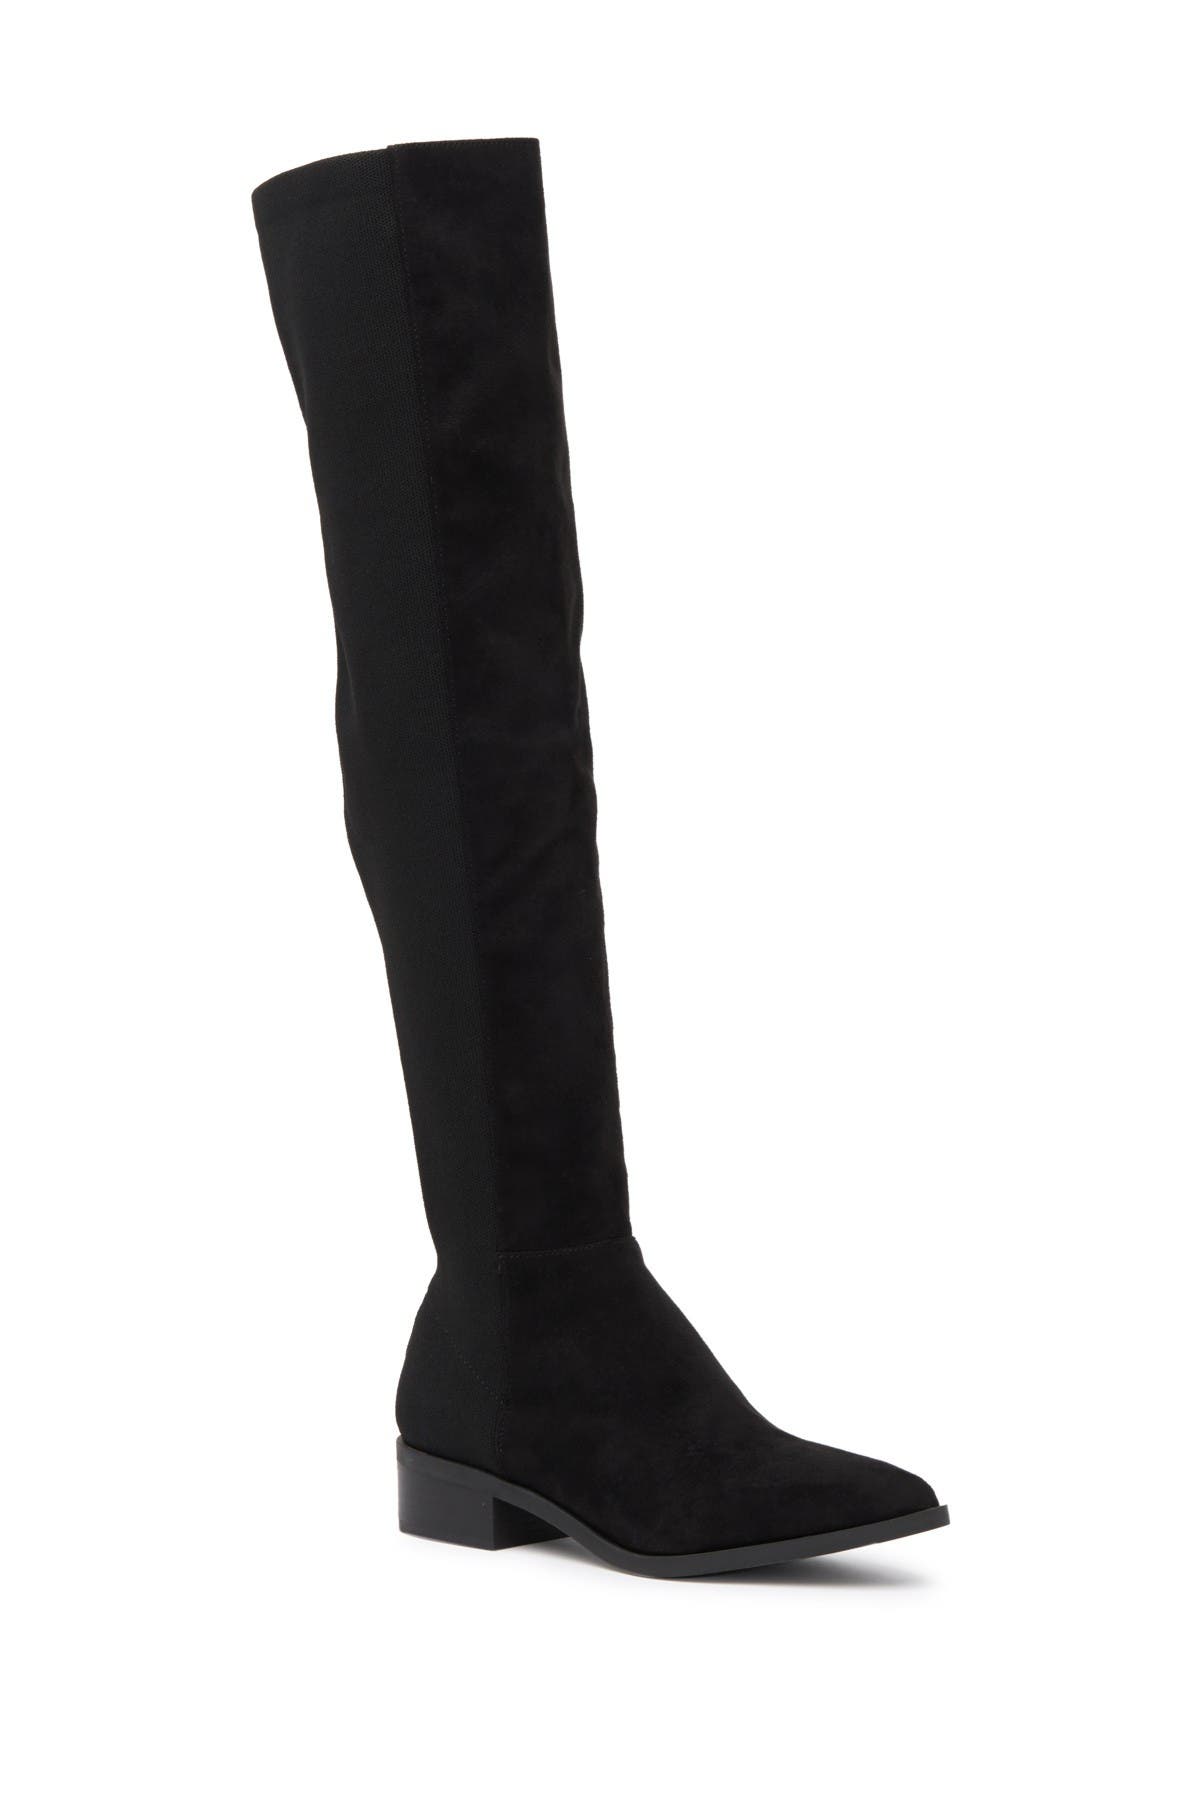 nordstrom black over the knee boots